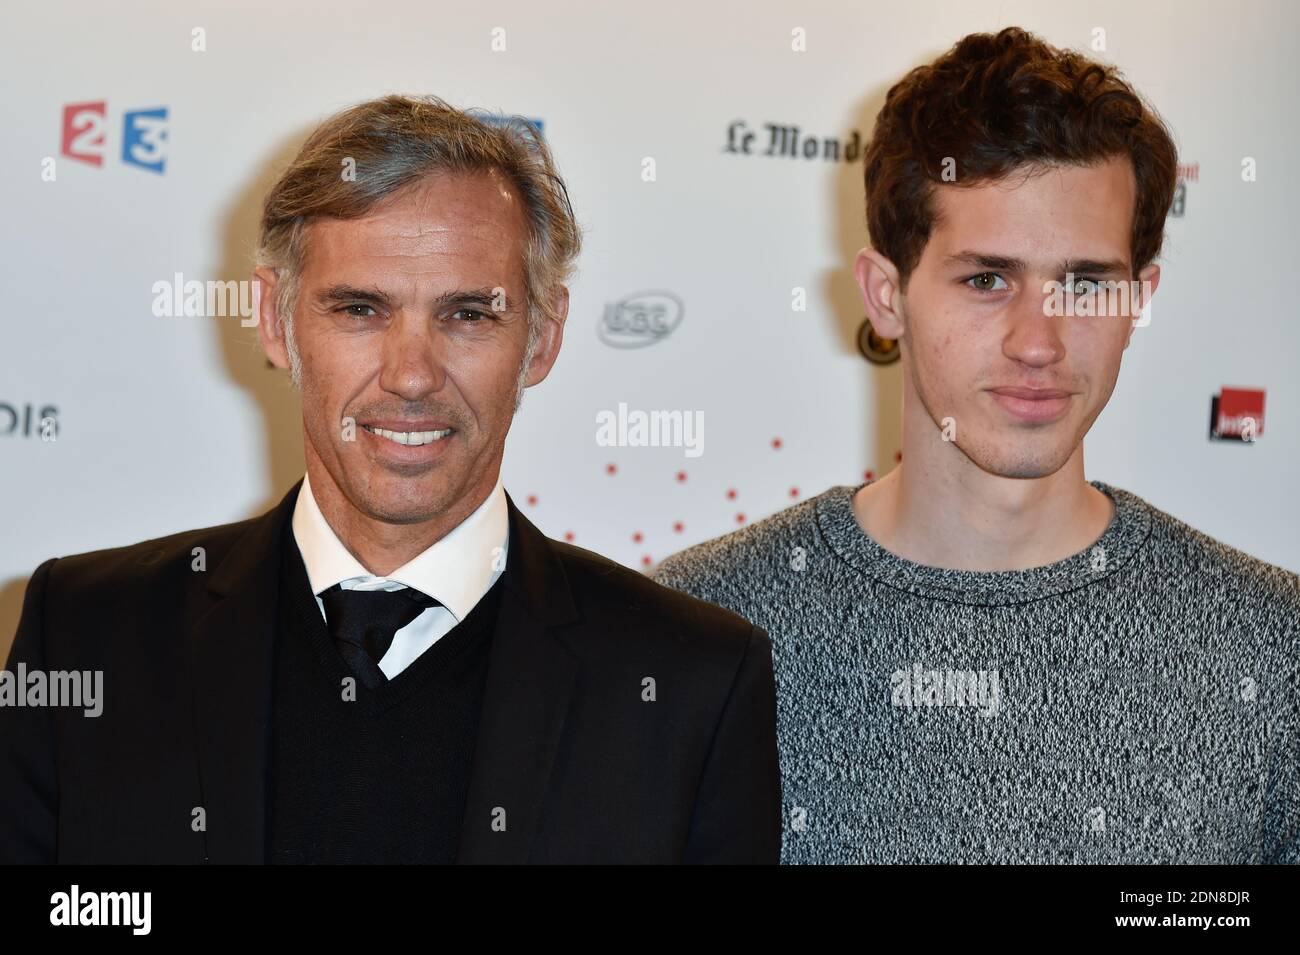 Paul Belmondo and his son Victor attend the preview of the exhibition  Lumiere ! Le Cinema Invente held at the Grand Palais in Paris, France,  March 26, 2015. Photo by Nicolas Gouhier/ABACAPRESS.COM